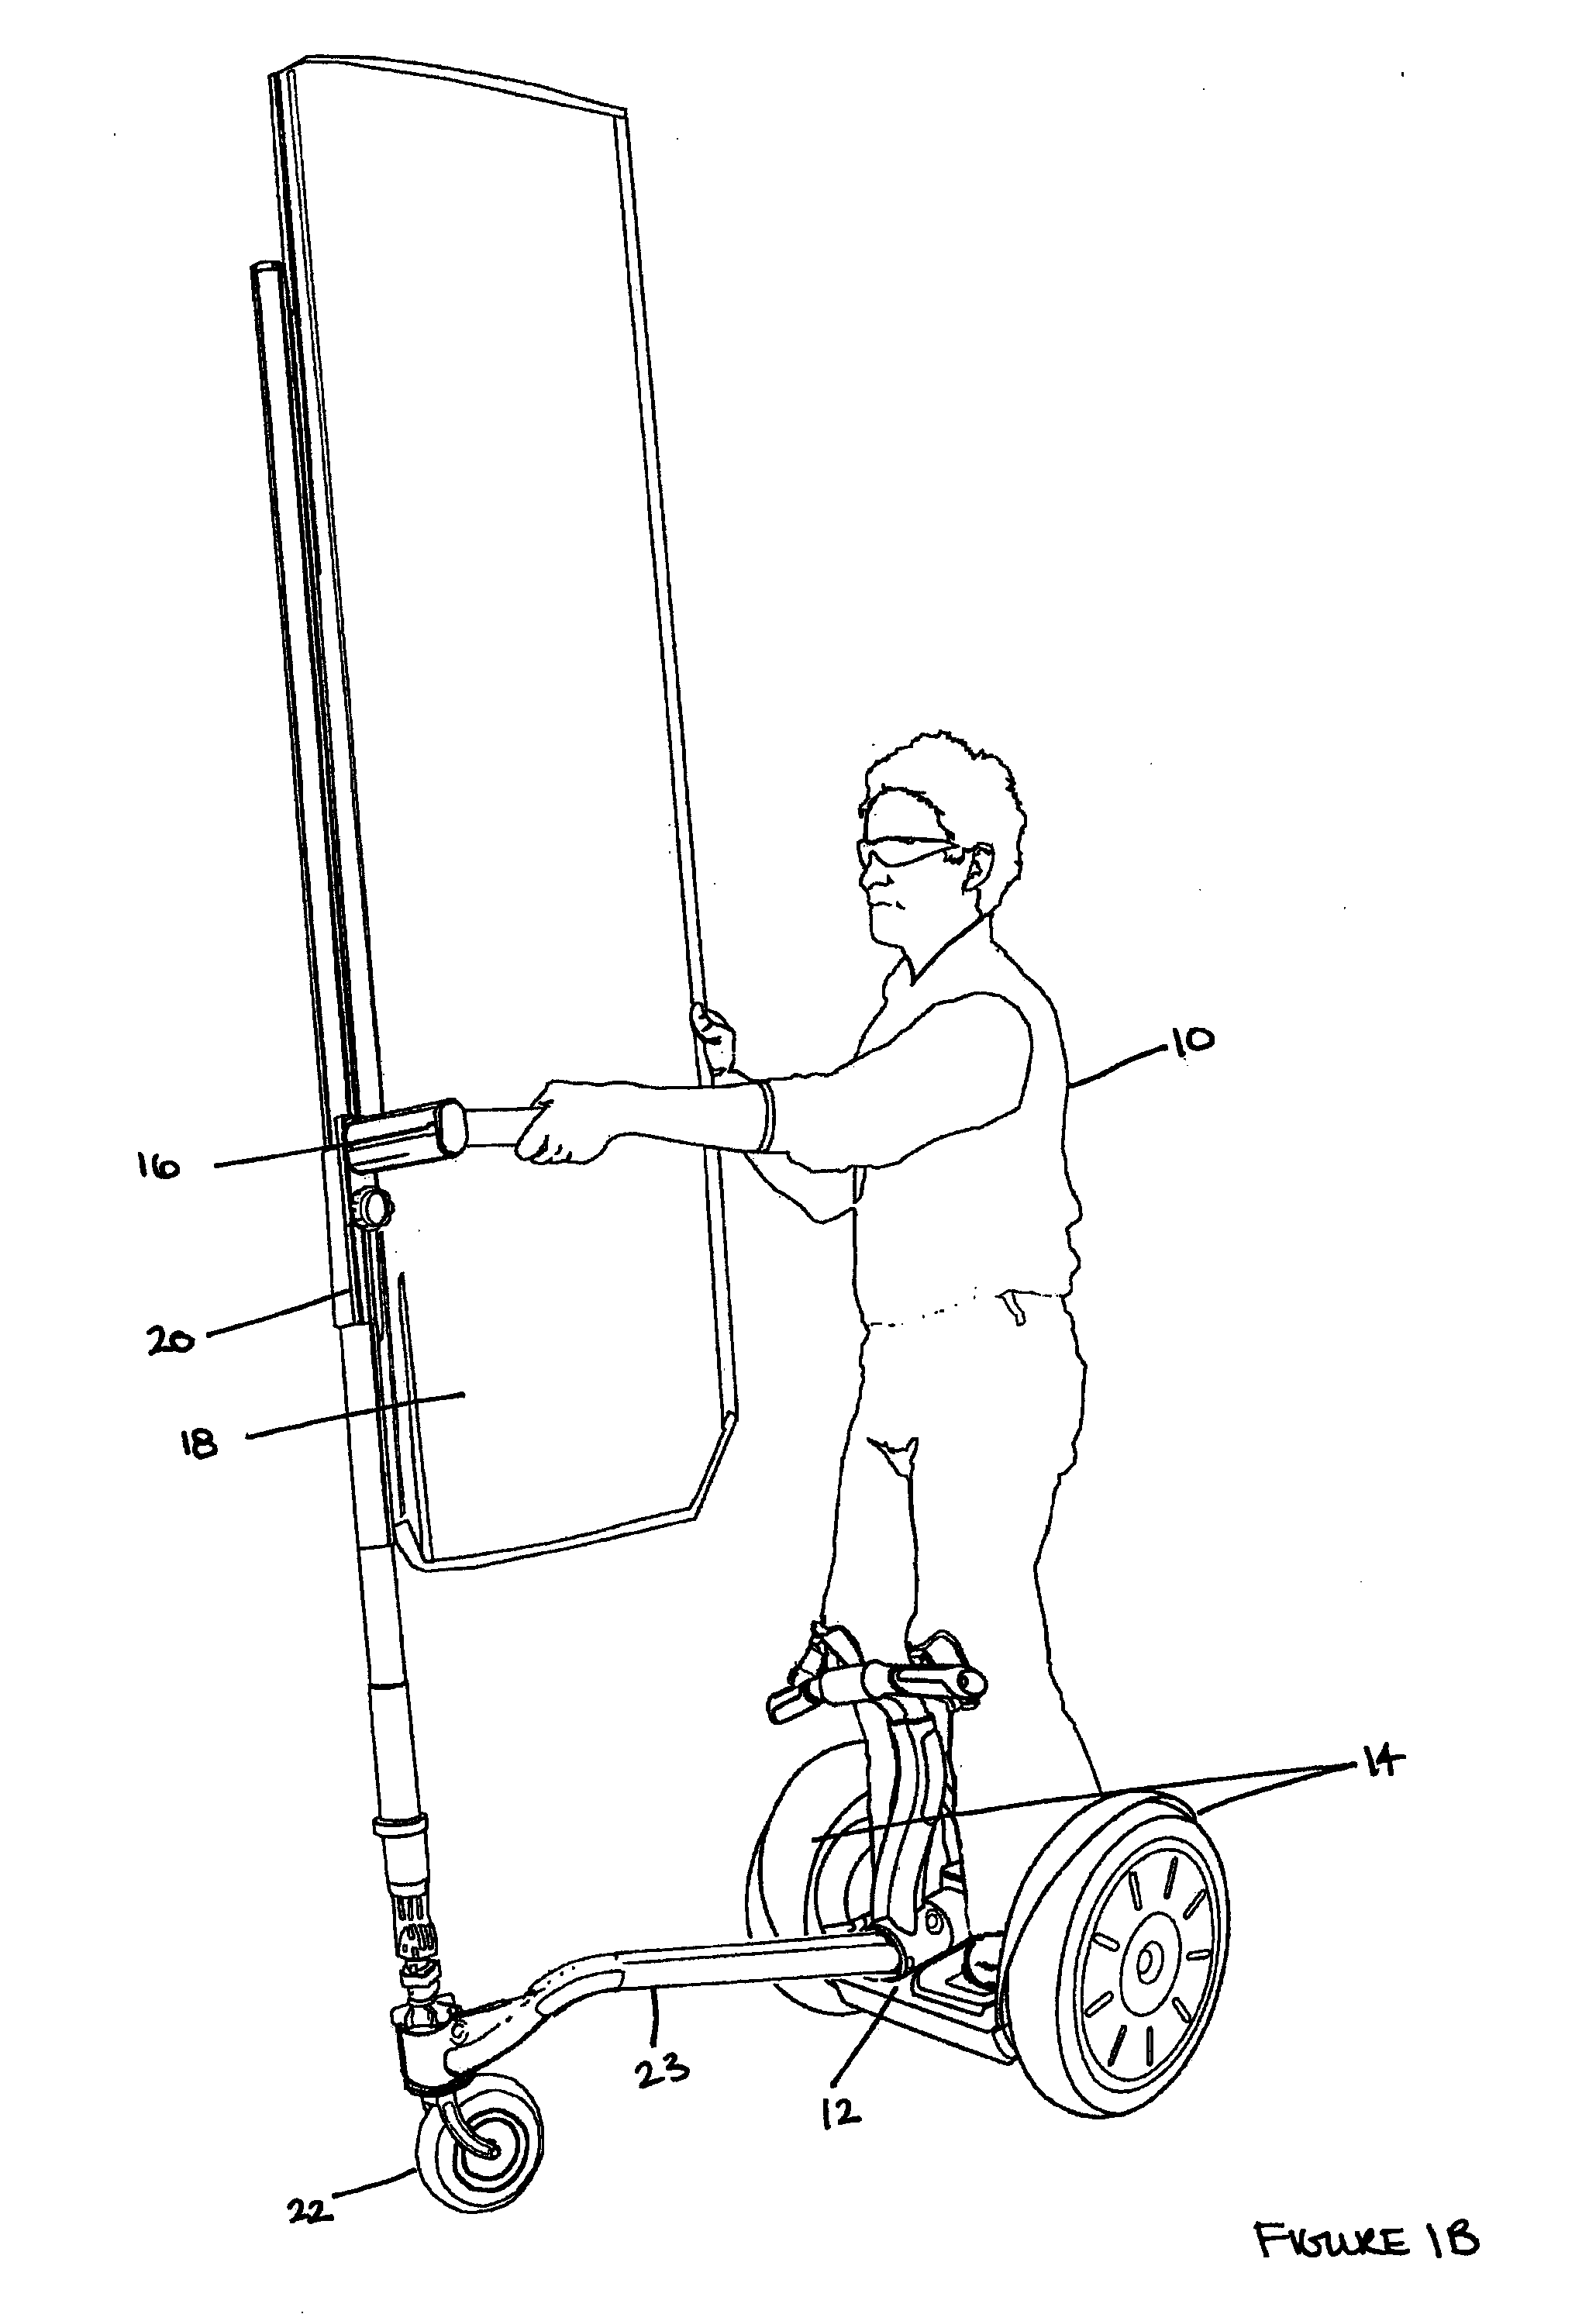 System and method for media display